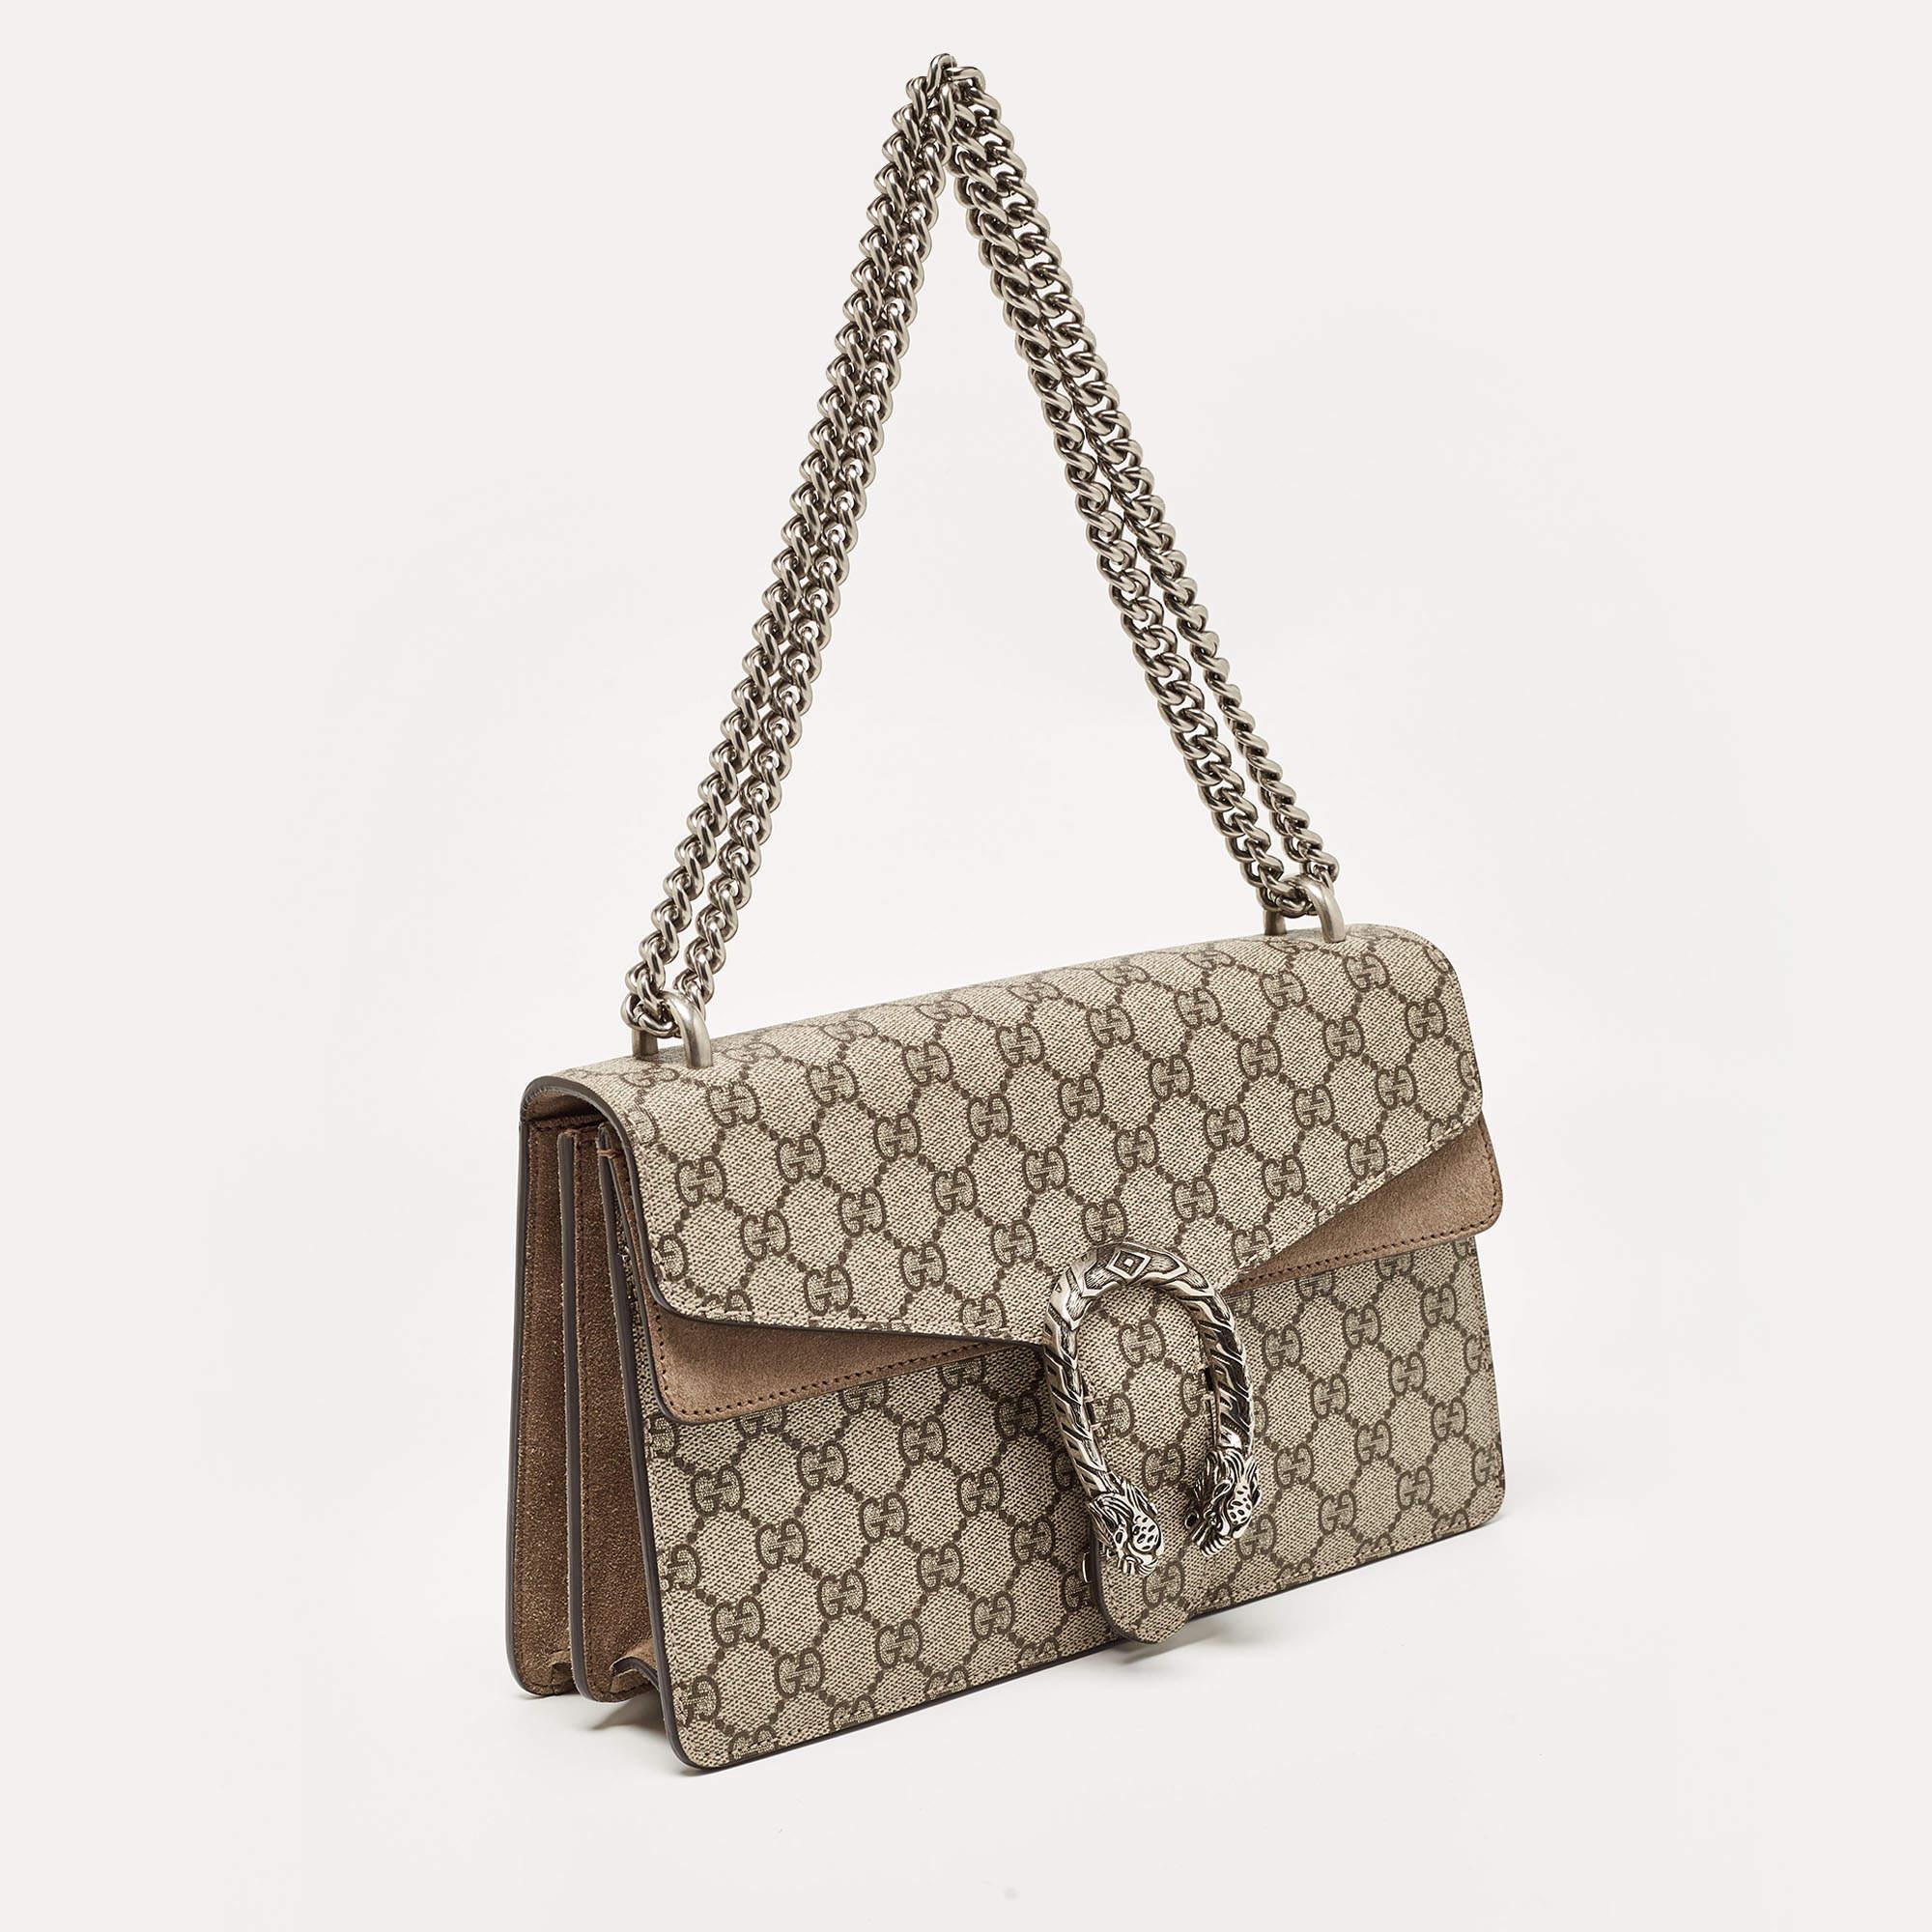 Picture yourself swinging this gorgeous bag at your outings with friends or at social gatherings and imagine how it will not only complement all your outfits but fetch you endless compliments. This Gucci creation has been beautifully crafted from GG